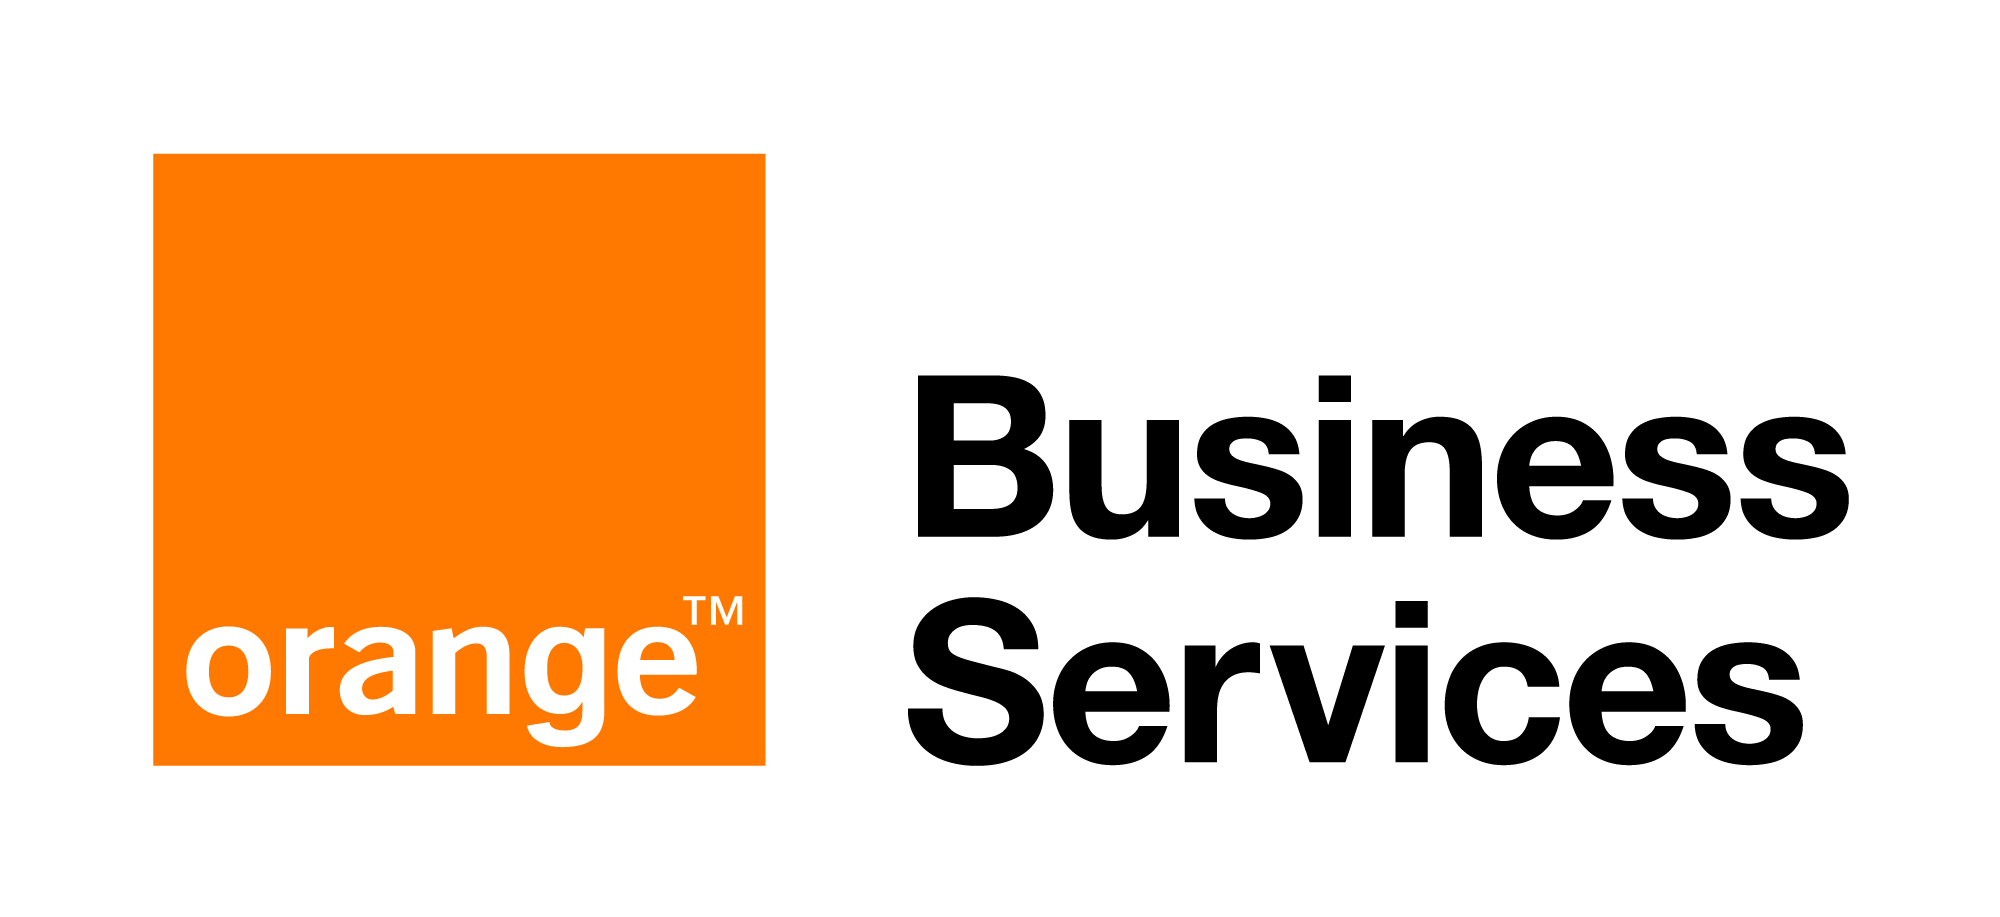 Orange Business Services - Leverage our consulting expertise, global network, end-to-end service approach and innovation capabilities to elevate customer engagement